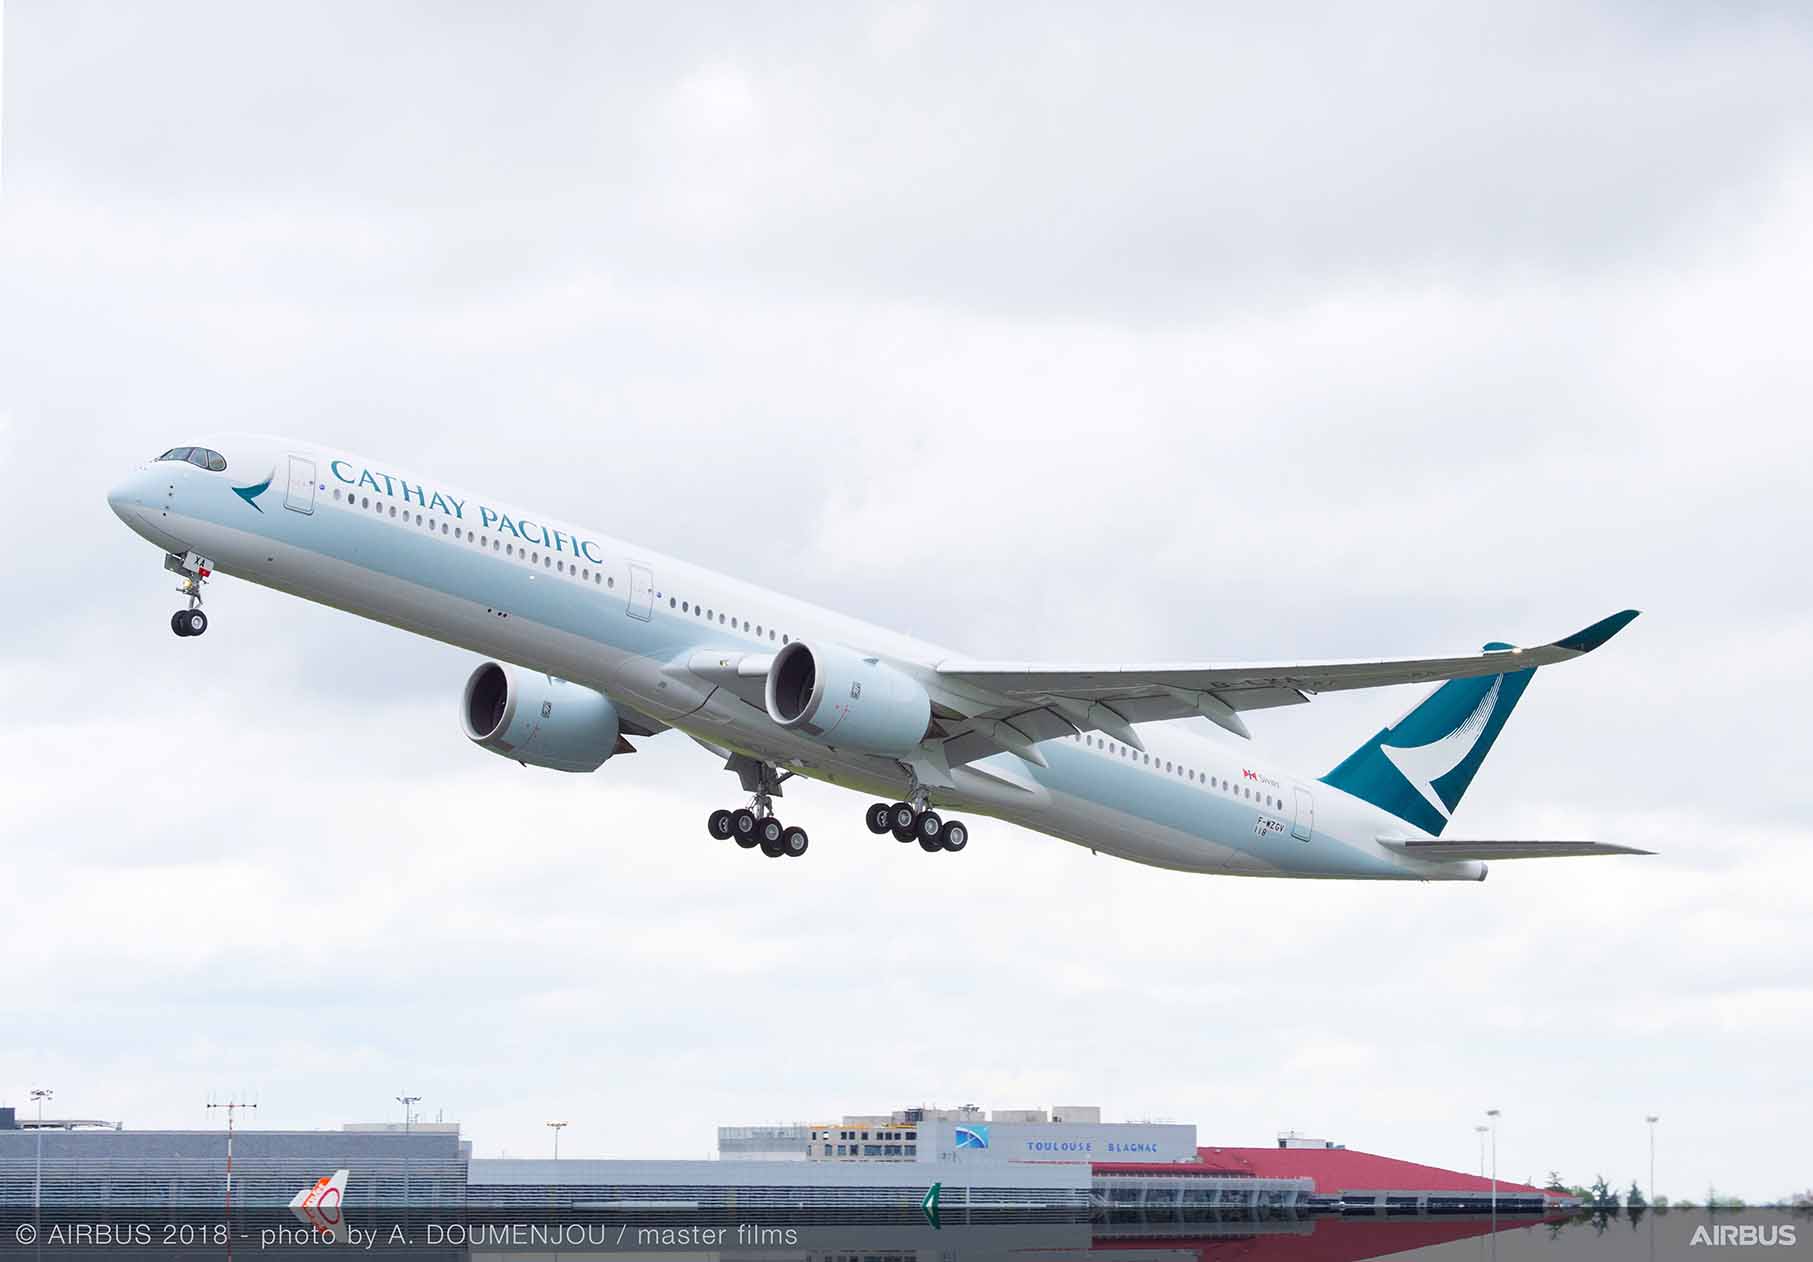 Cathay Pacific says suspending Irish flights was ‘difficult decision’